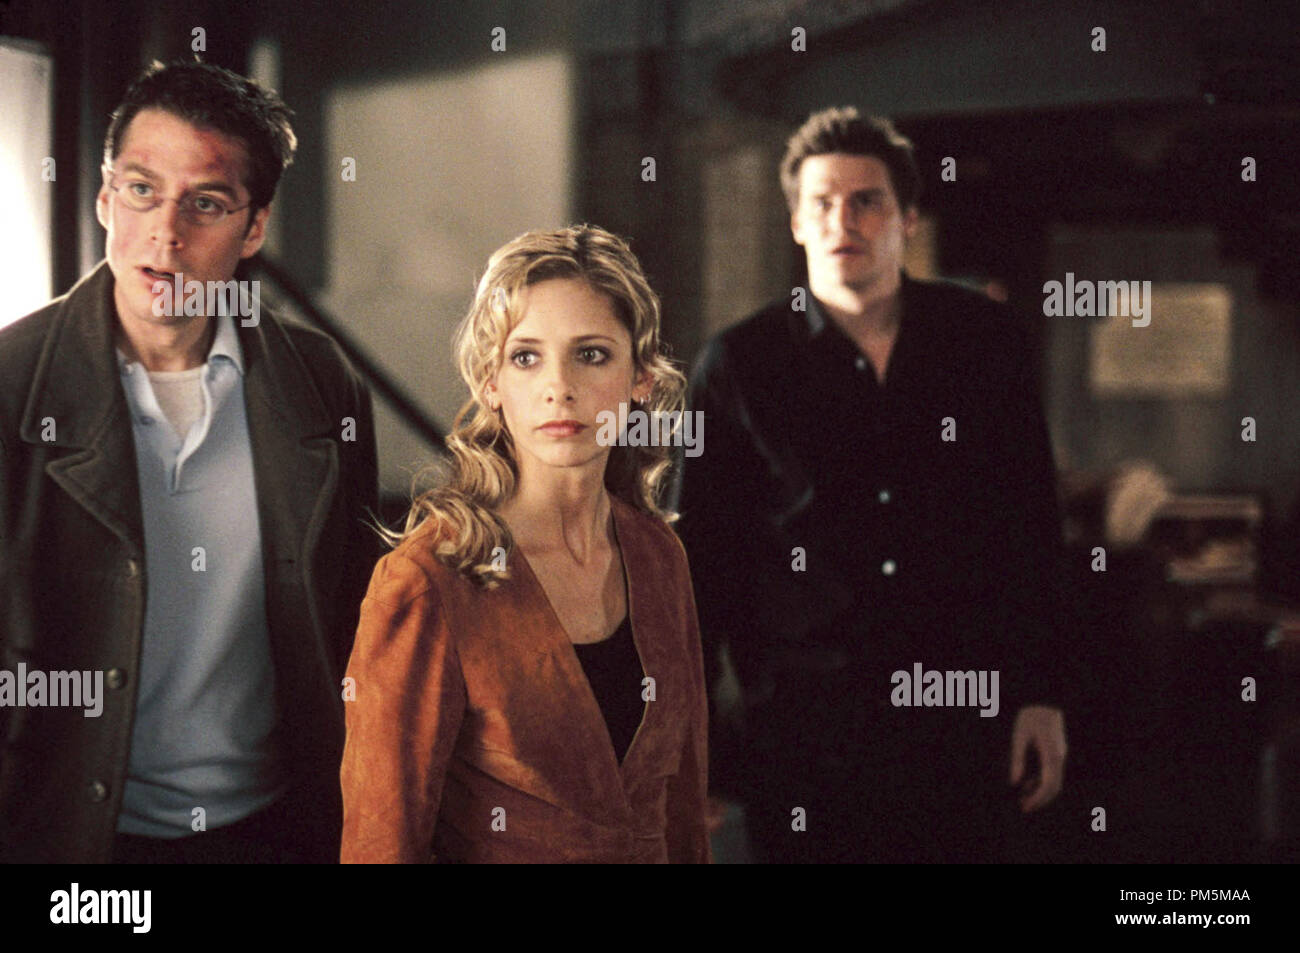 Film Still / Publicity Stills from 'Angel' Episode: 'Sanctuary' Alexis Denisof, Sarah Michelle Gellar, David Boreanaz May 2, 2000 Photo Credit: Richard Cartwright  File Reference # 30846779THA  For Editorial Use Only -  All Rights Reserved Stock Photo